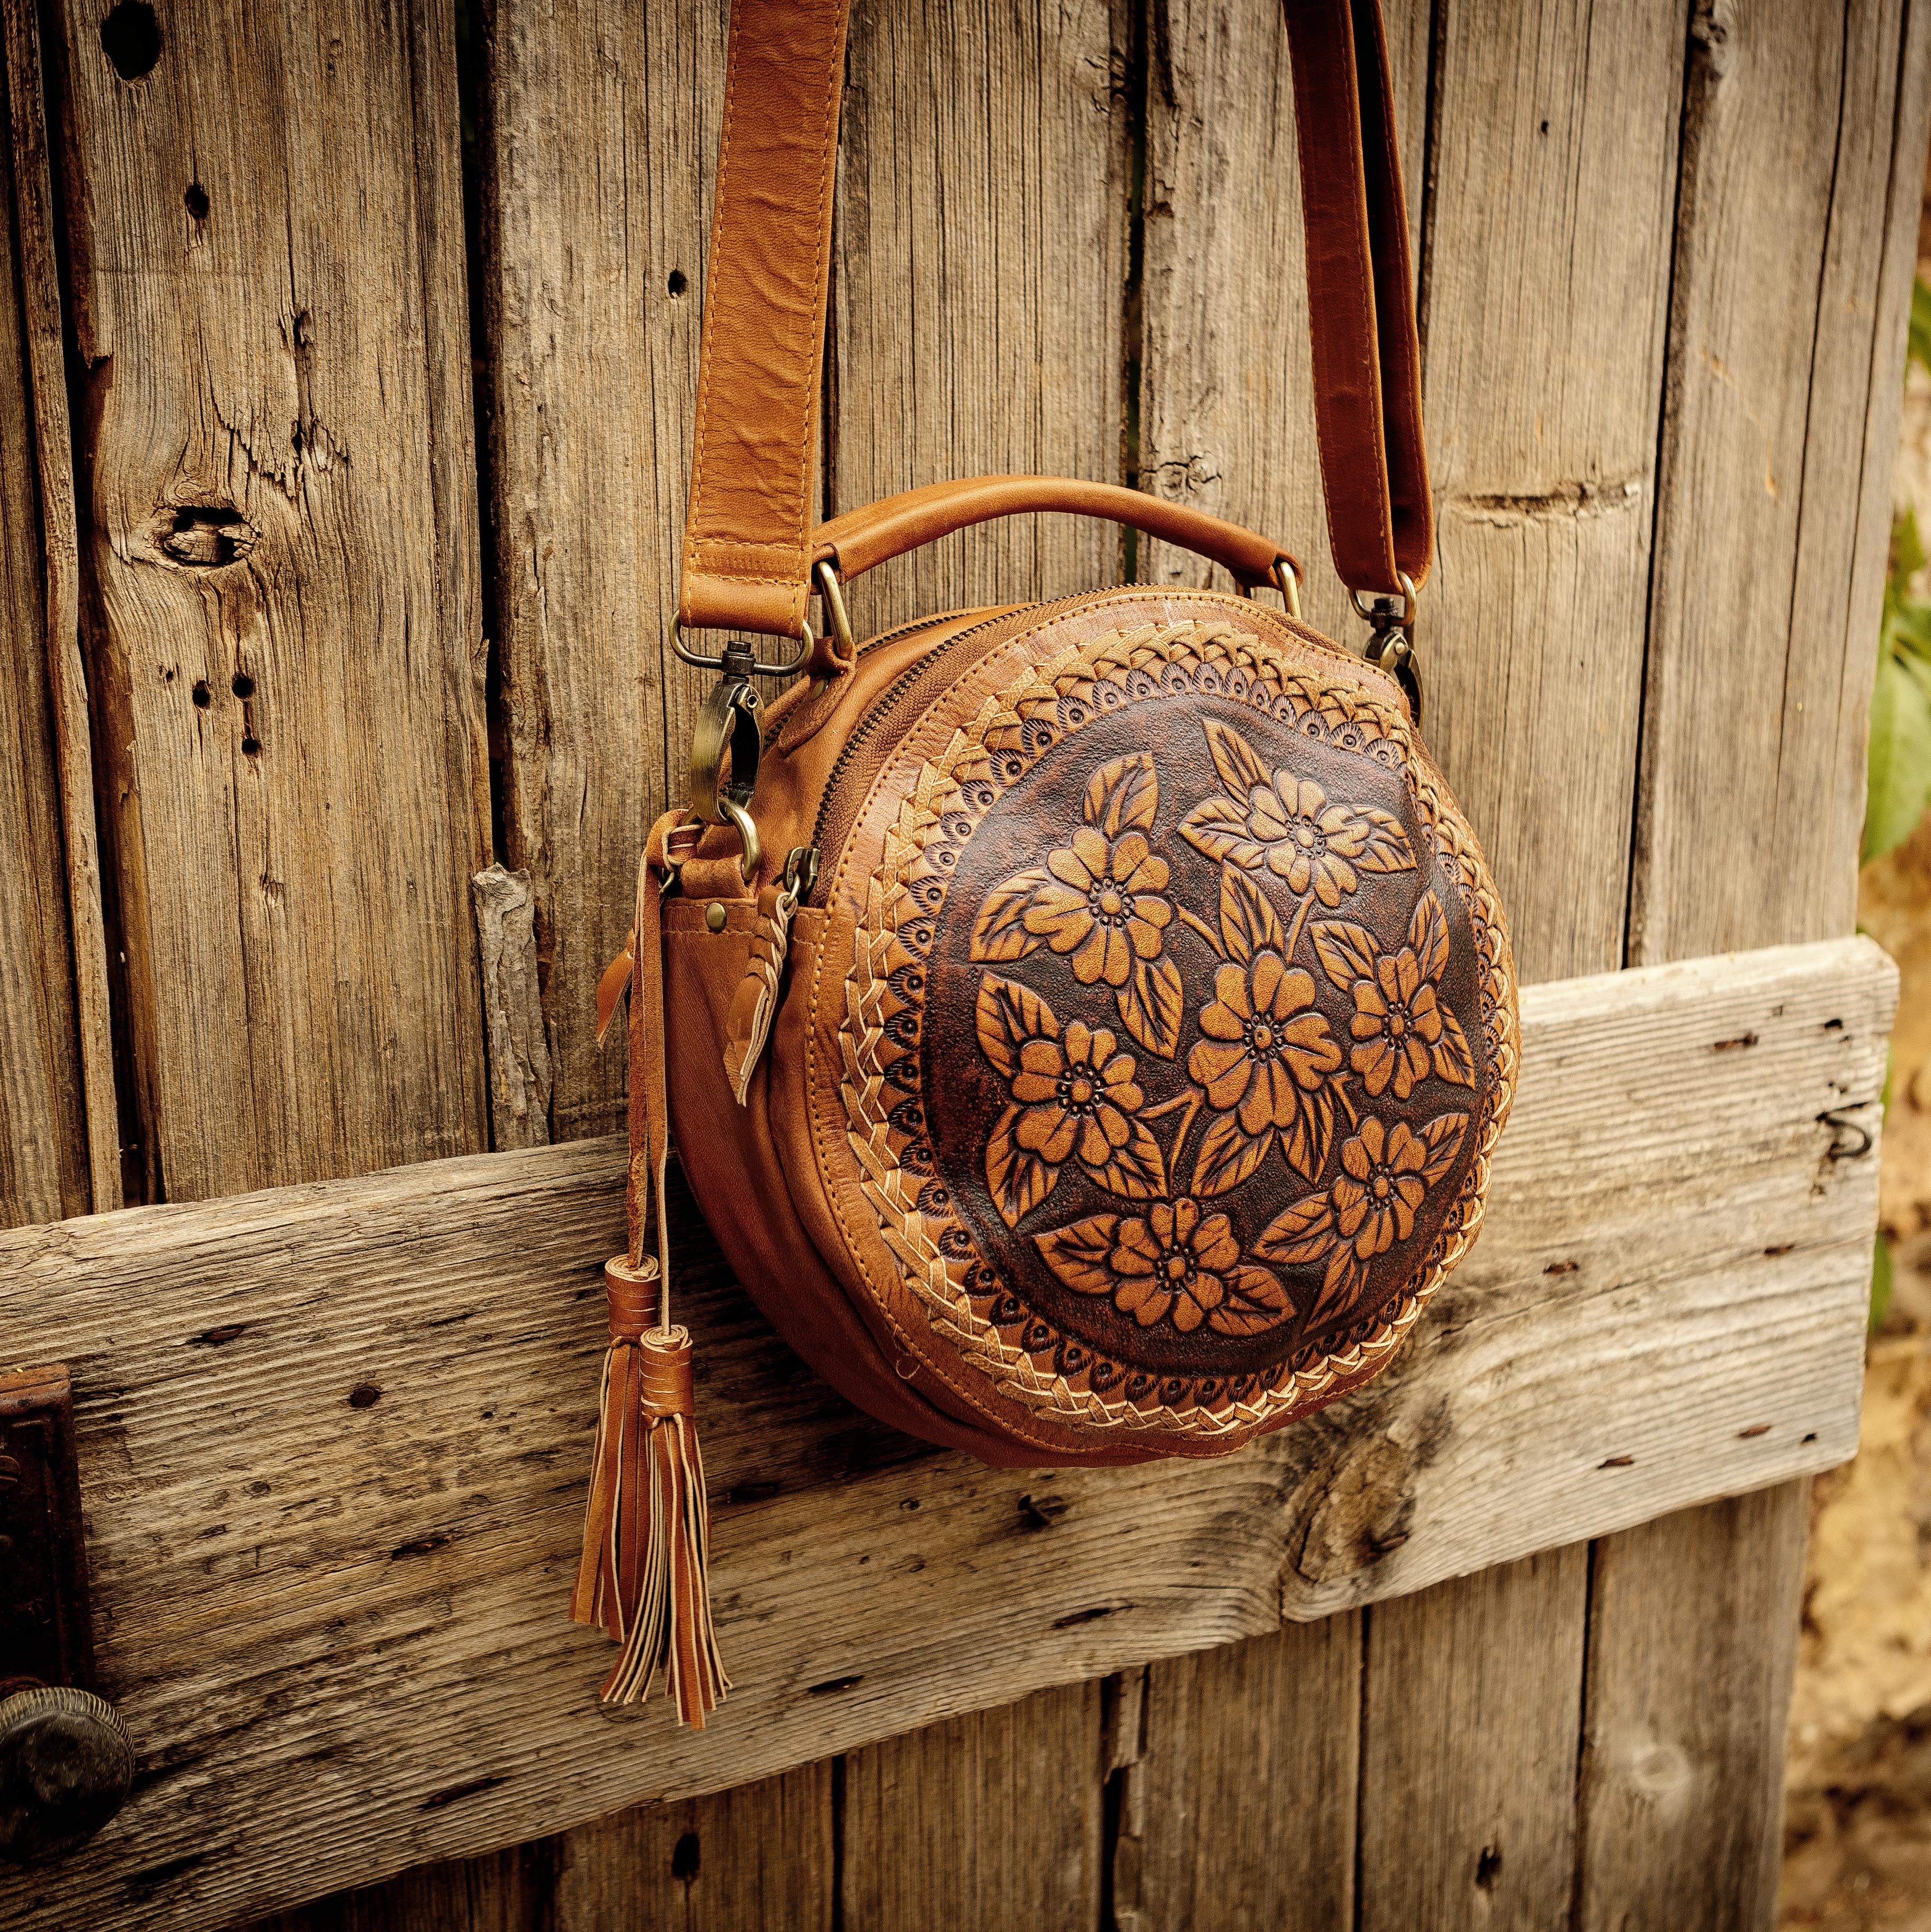 Wearable Wooden Bags That I Cross-Stitch With Nature Patterns | Bored Panda